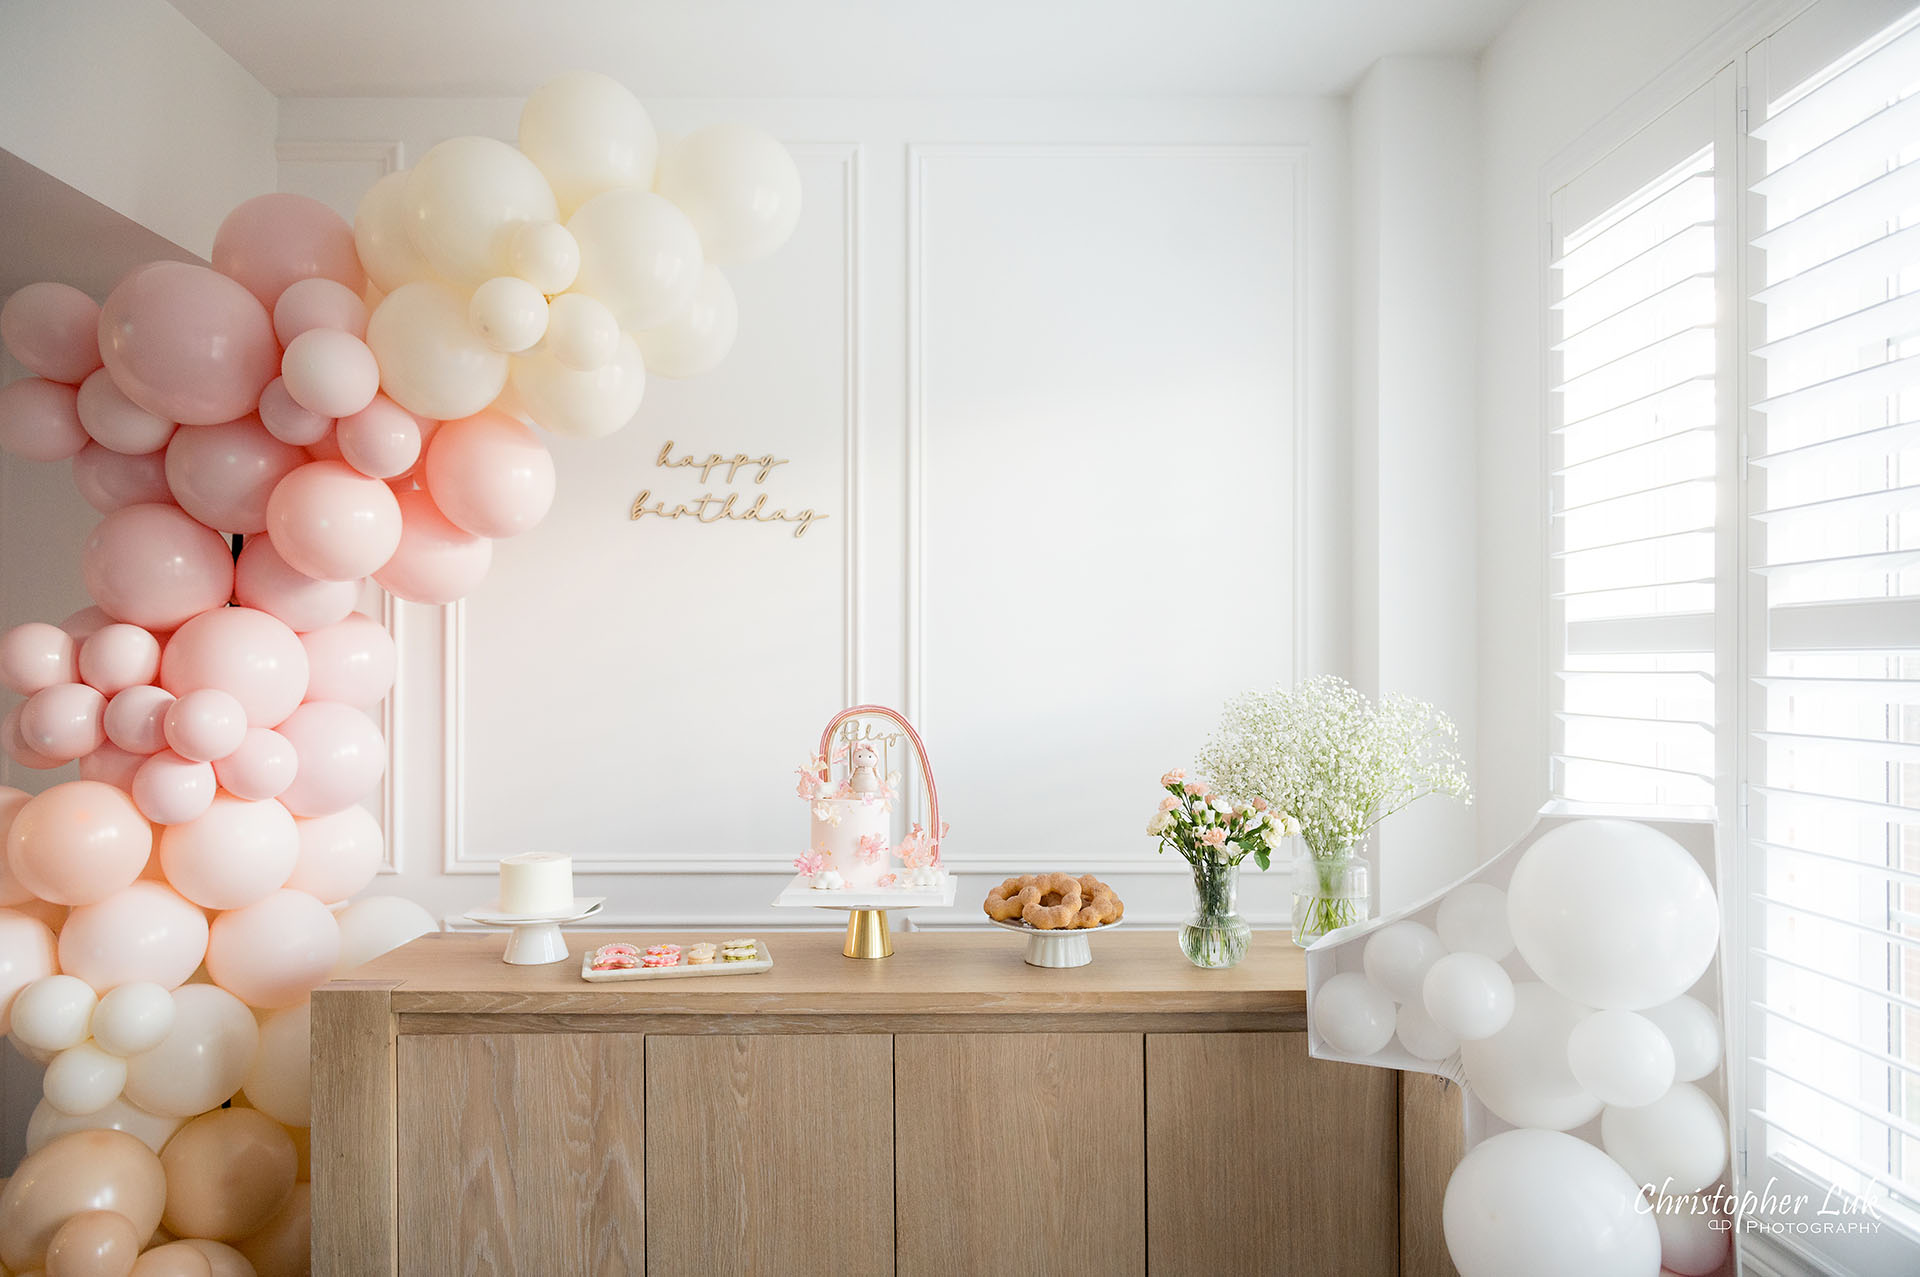 Toronto Family Baby's First Birthday Party Pink Balloon Arch Custom Cake Macarons Japanese Mochi Donuts Decor Wide